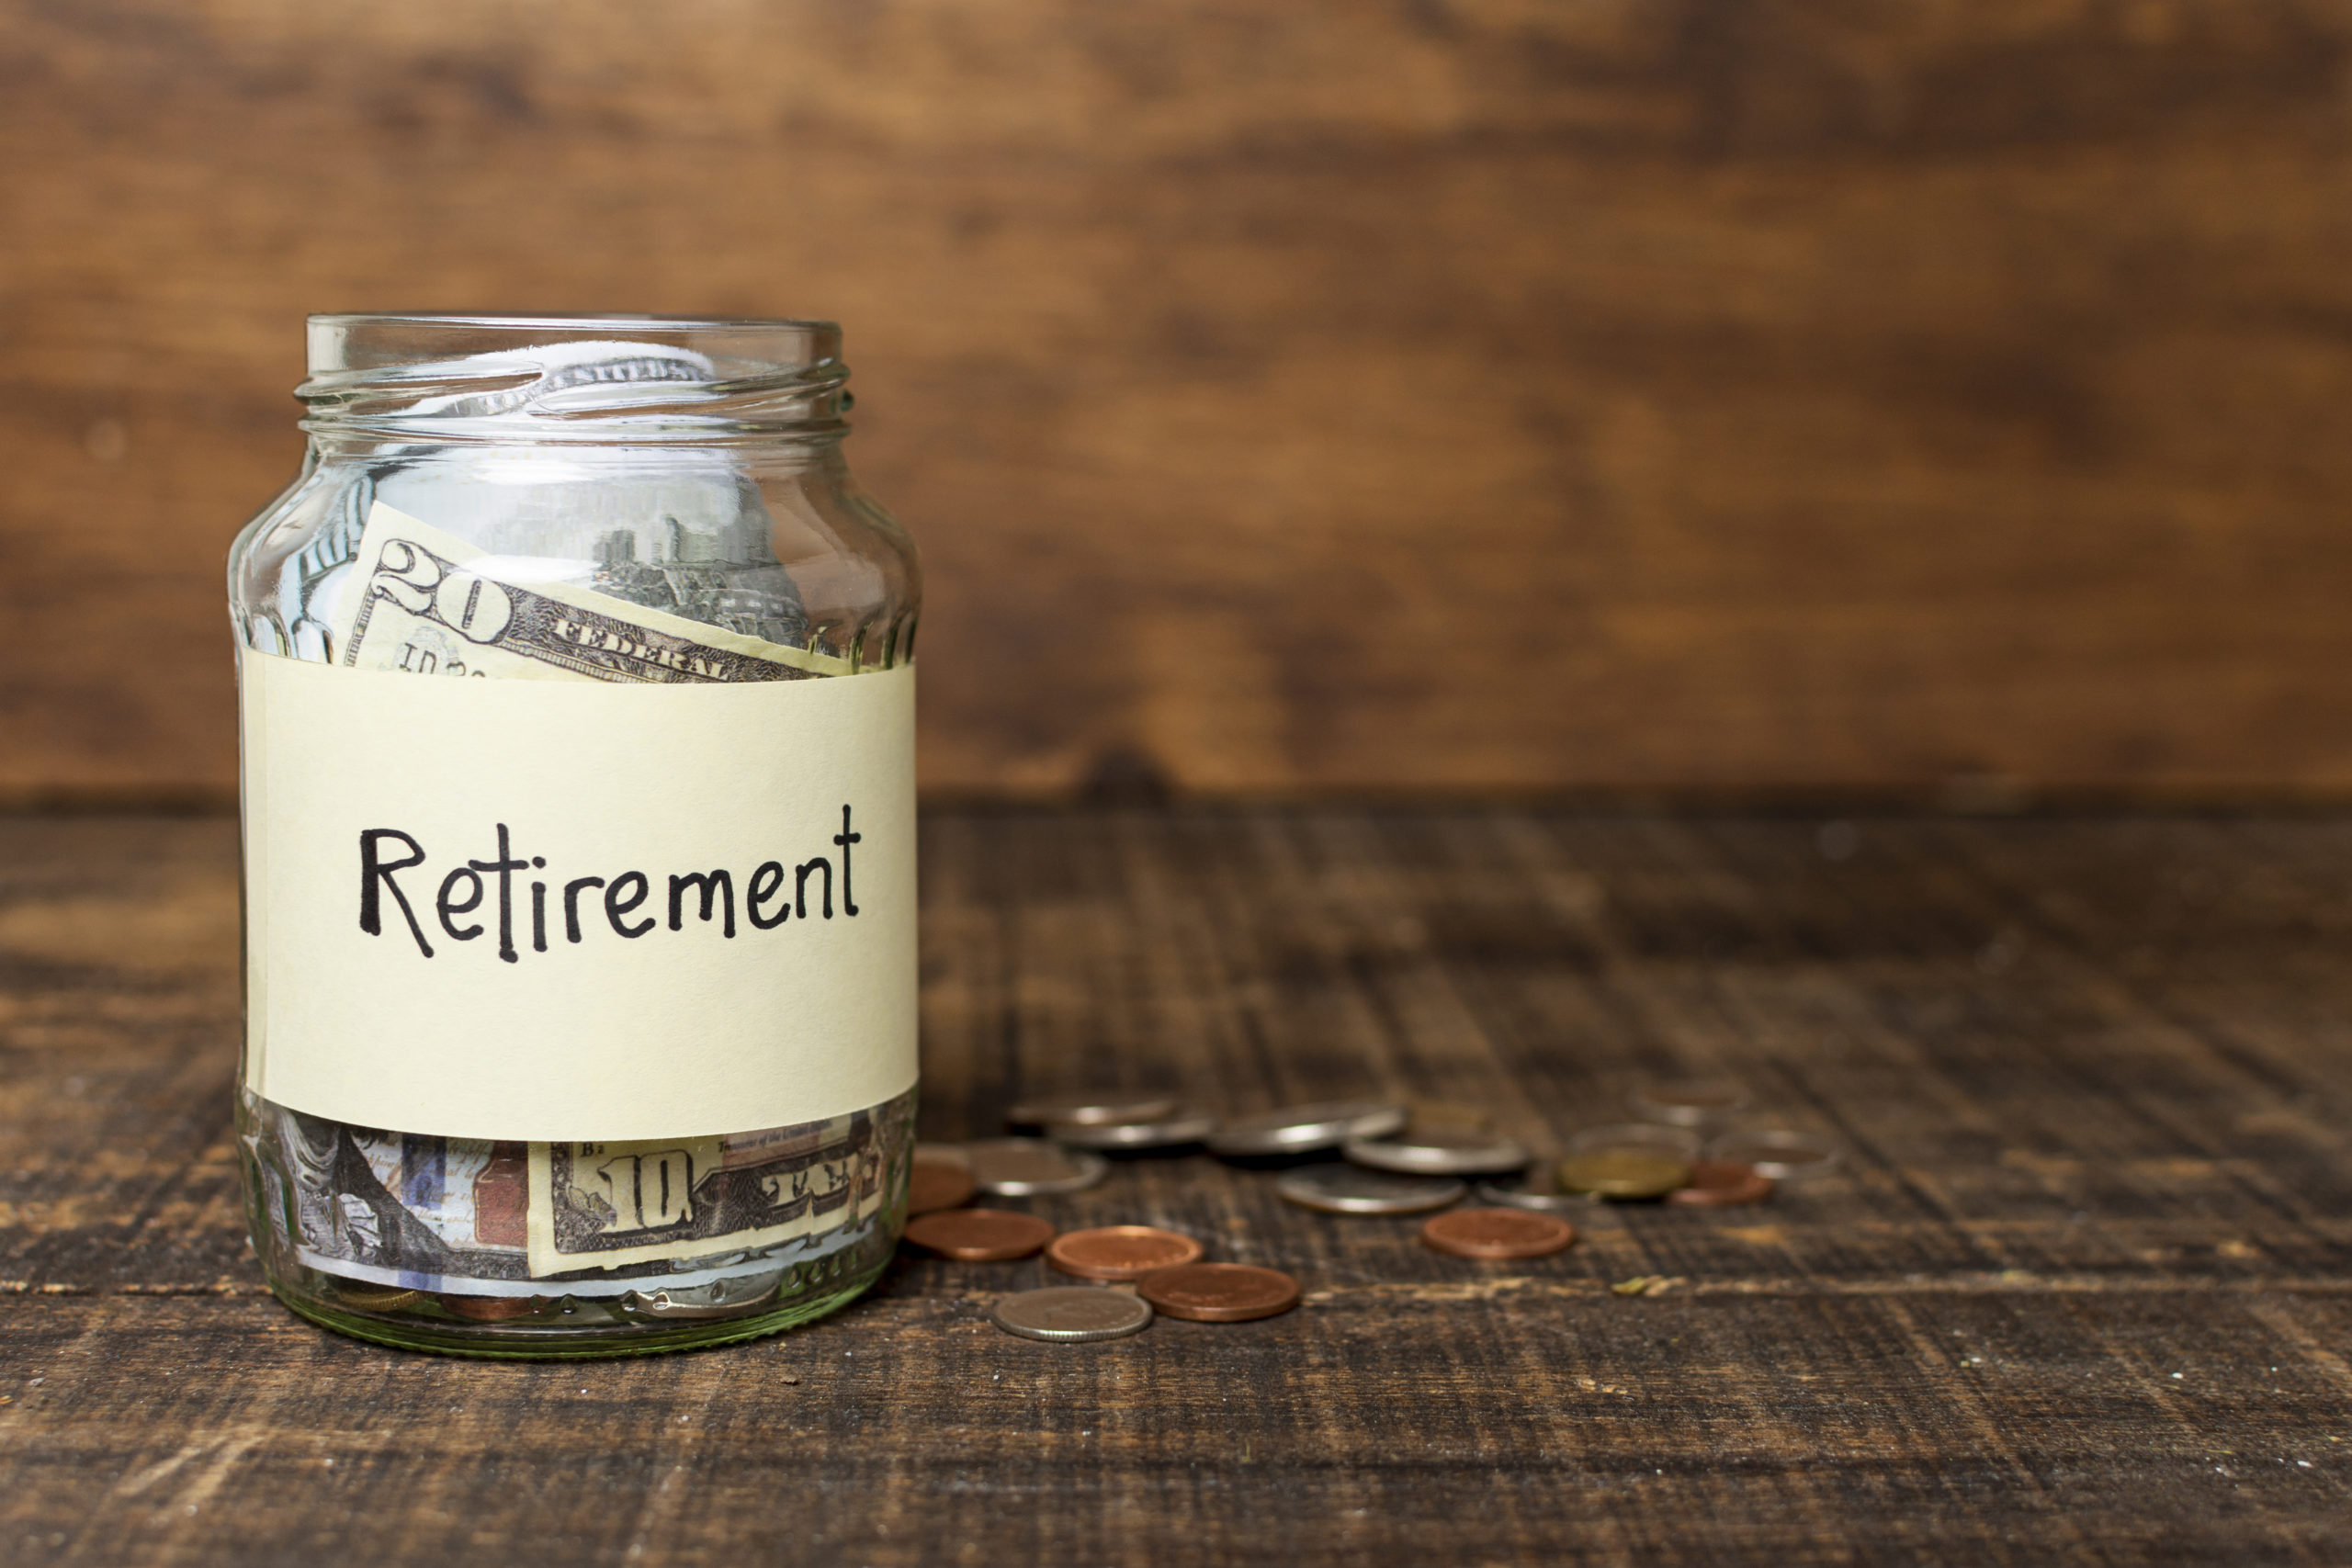 The Top 5 Financial Planning Challenges In The First 10 Years of Retirement